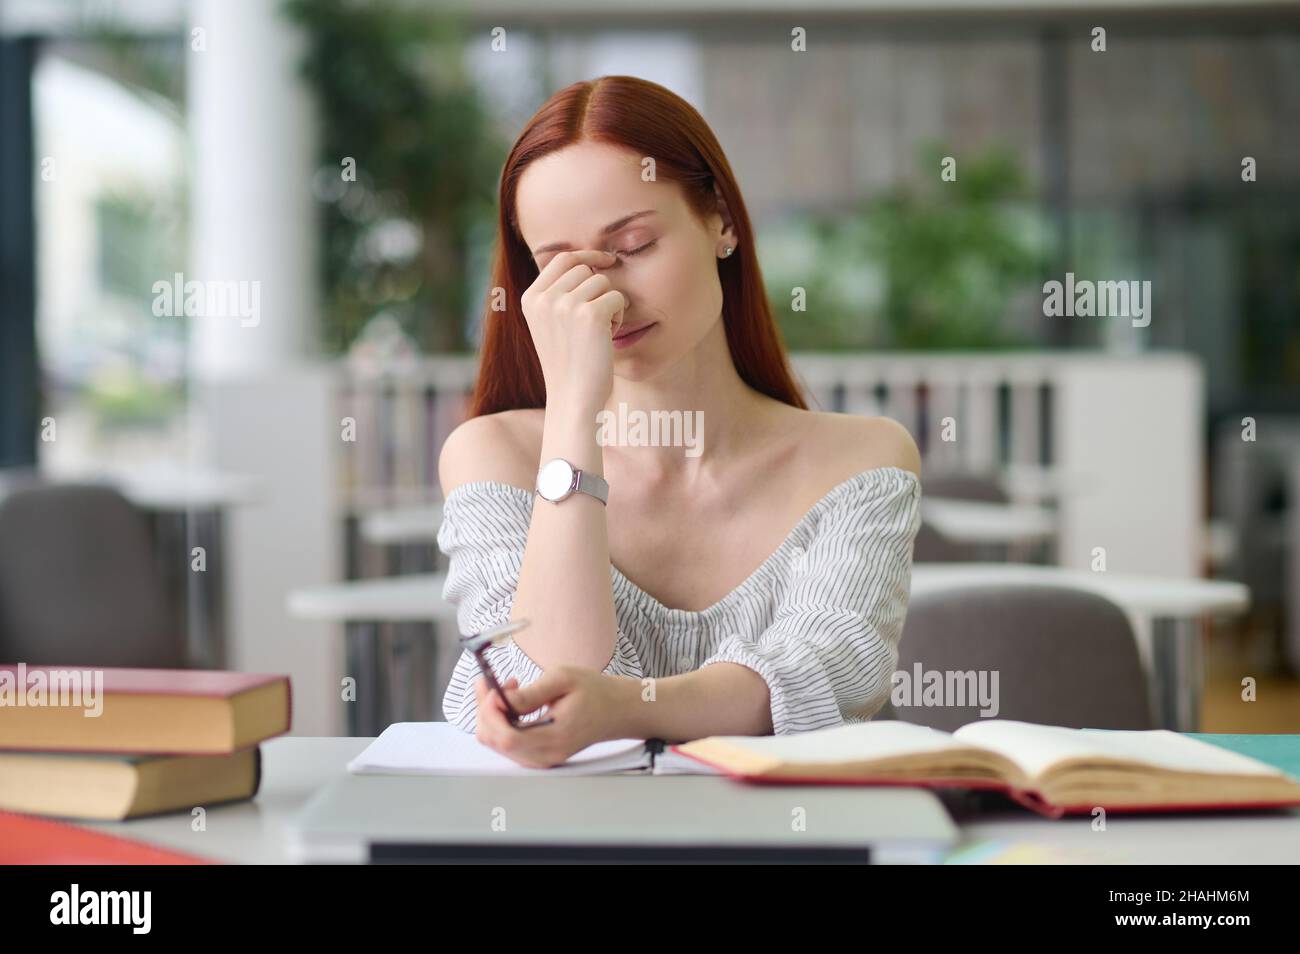 Tired woman with closed eyes sitting at table Stock Photo